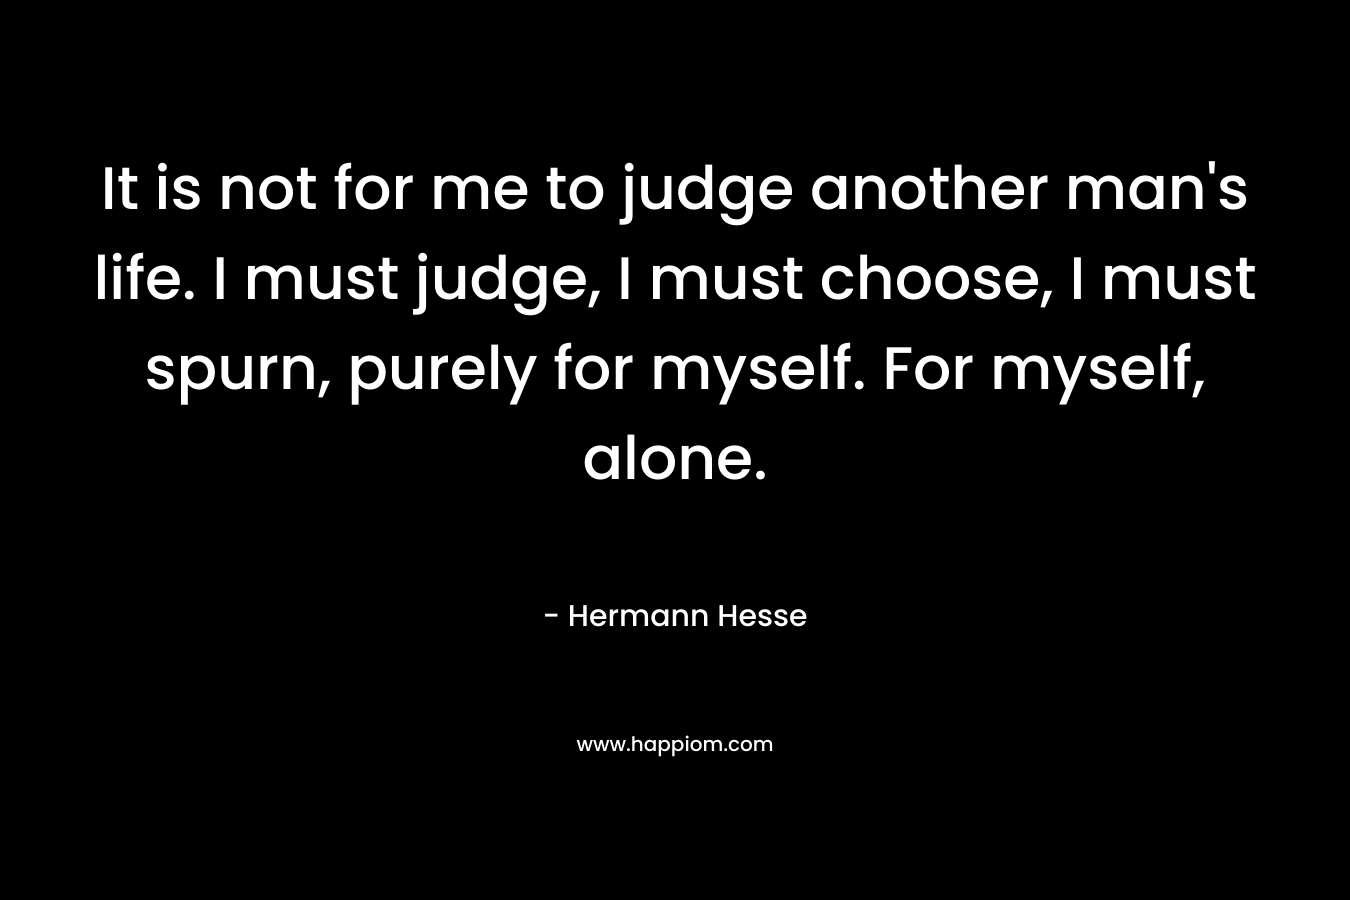 It is not for me to judge another man's life. I must judge, I must choose, I must spurn, purely for myself. For myself, alone.